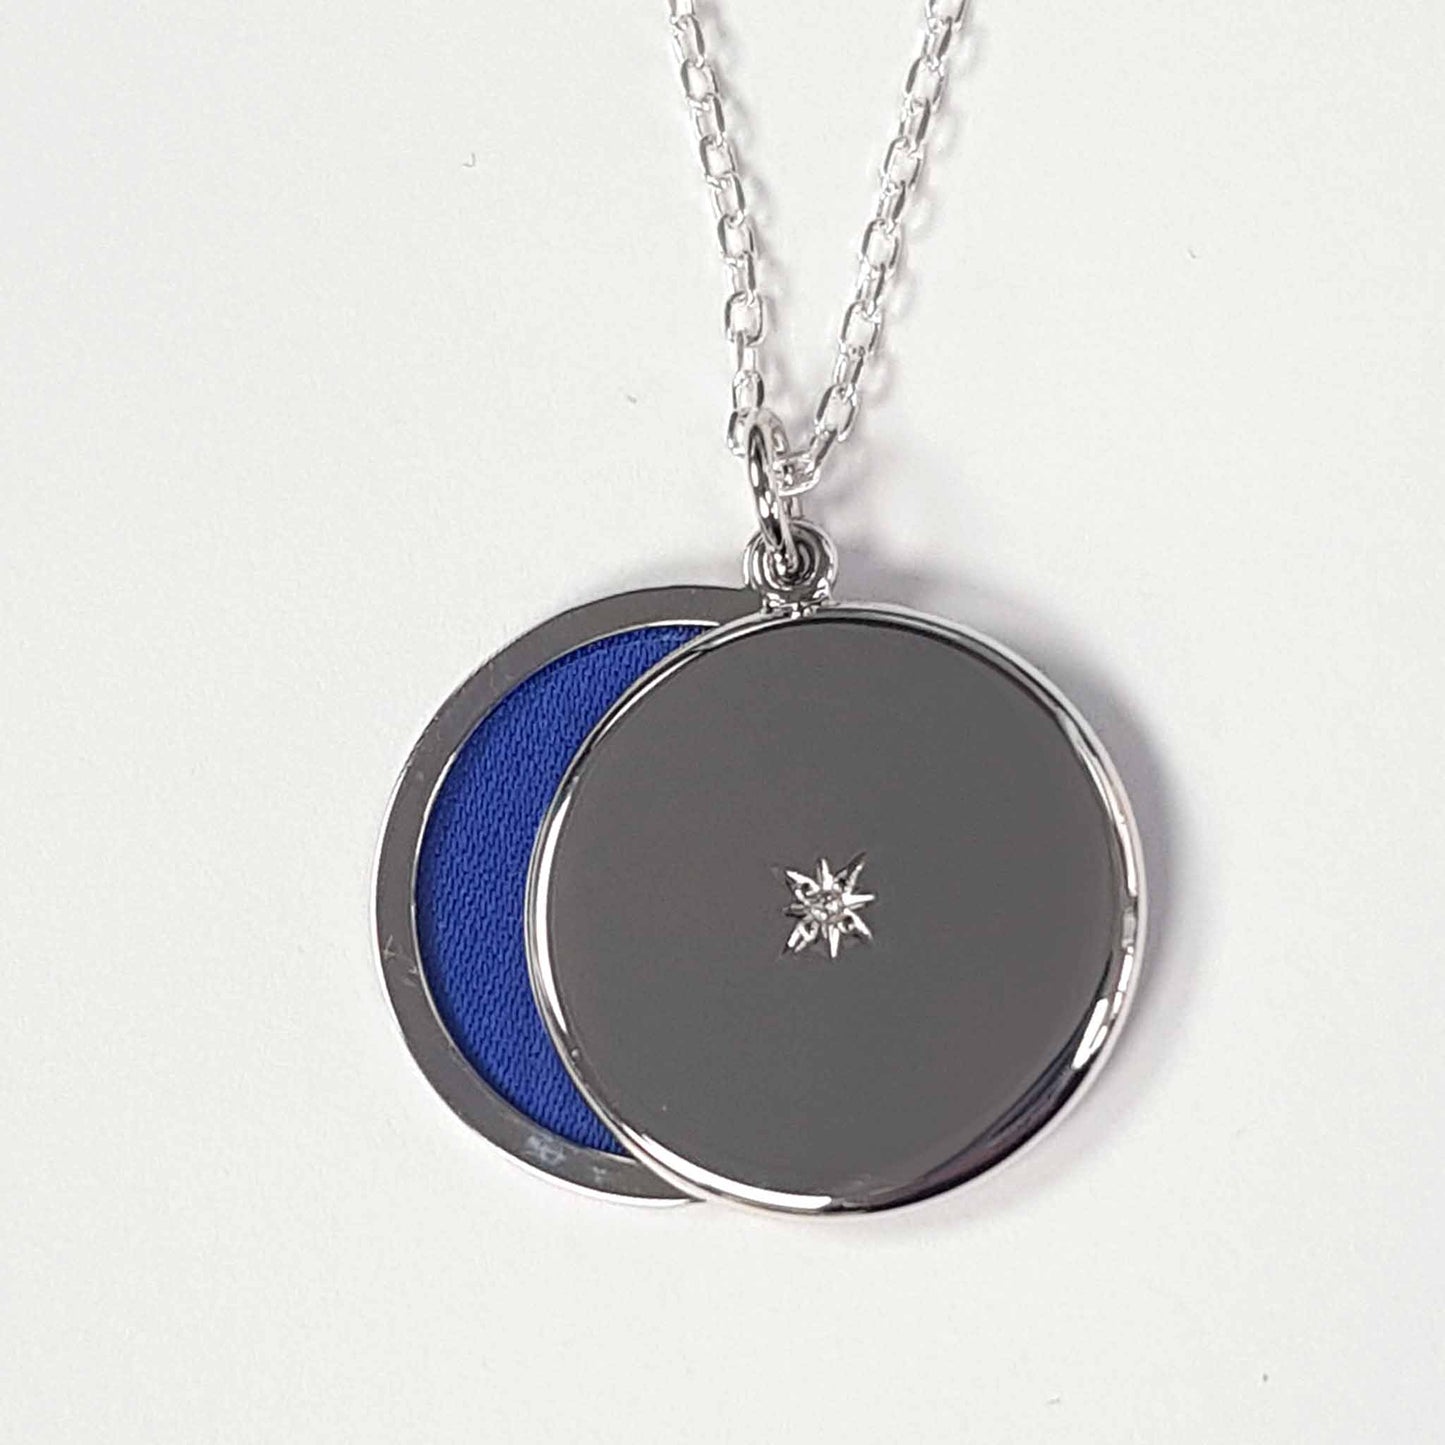 Round sterling silver locket with chain open to reveal blue insert